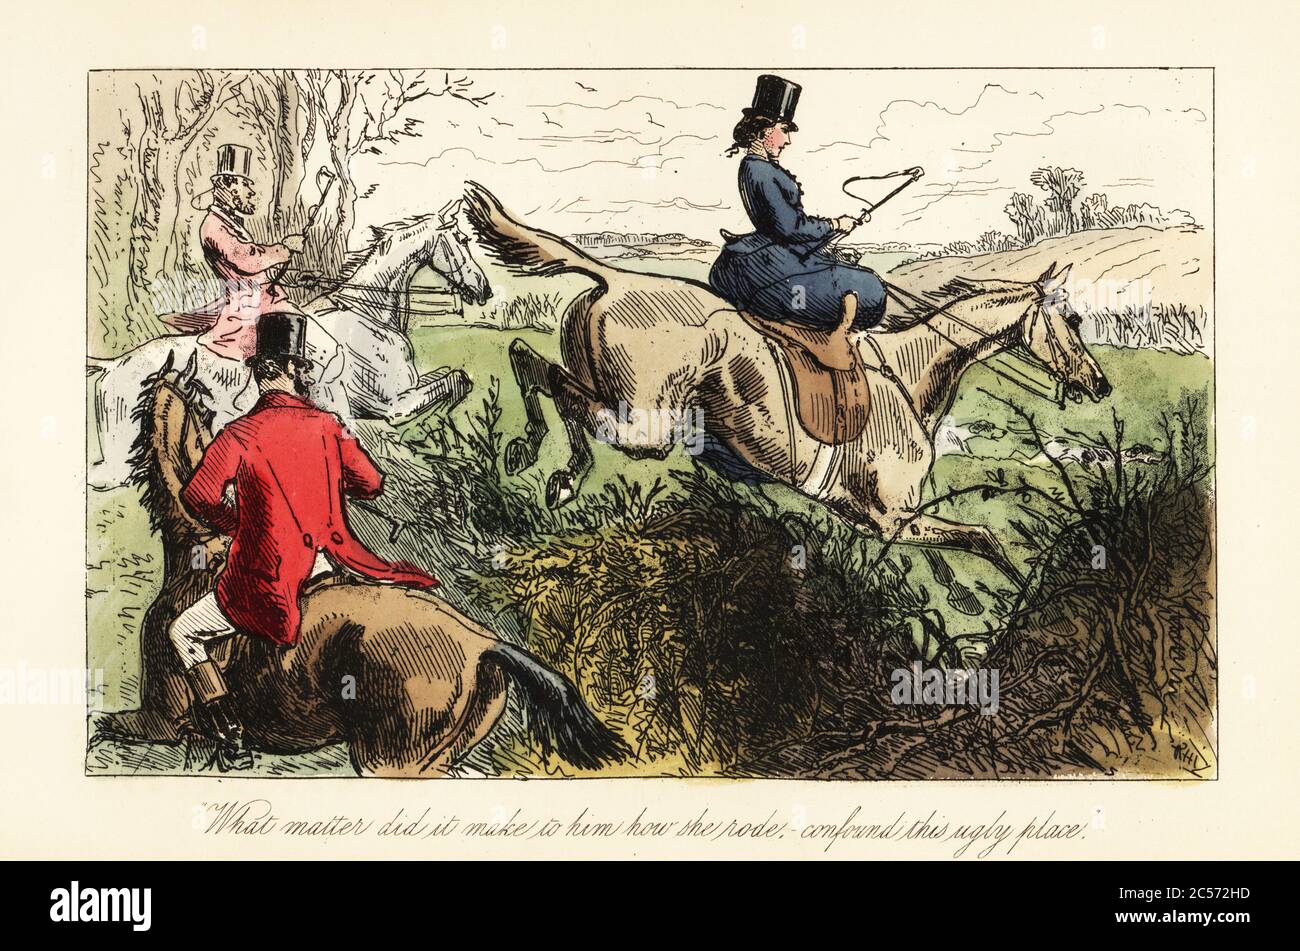 English huntswoman jumping sidesaddle over a fence, 19th century. Facey Romford unable to follow Lucy Somersville over a hedge. What matter did it make to him how she rode, confound this ugly place. Handcoloured steel engraving after an illustration by Hablot Knight Browne (Phiz) from Robert Smith Surtees’ Mr. Facey Romford’s Hounds, Bradbury, Evans and Co., London, 1865. Stock Photo